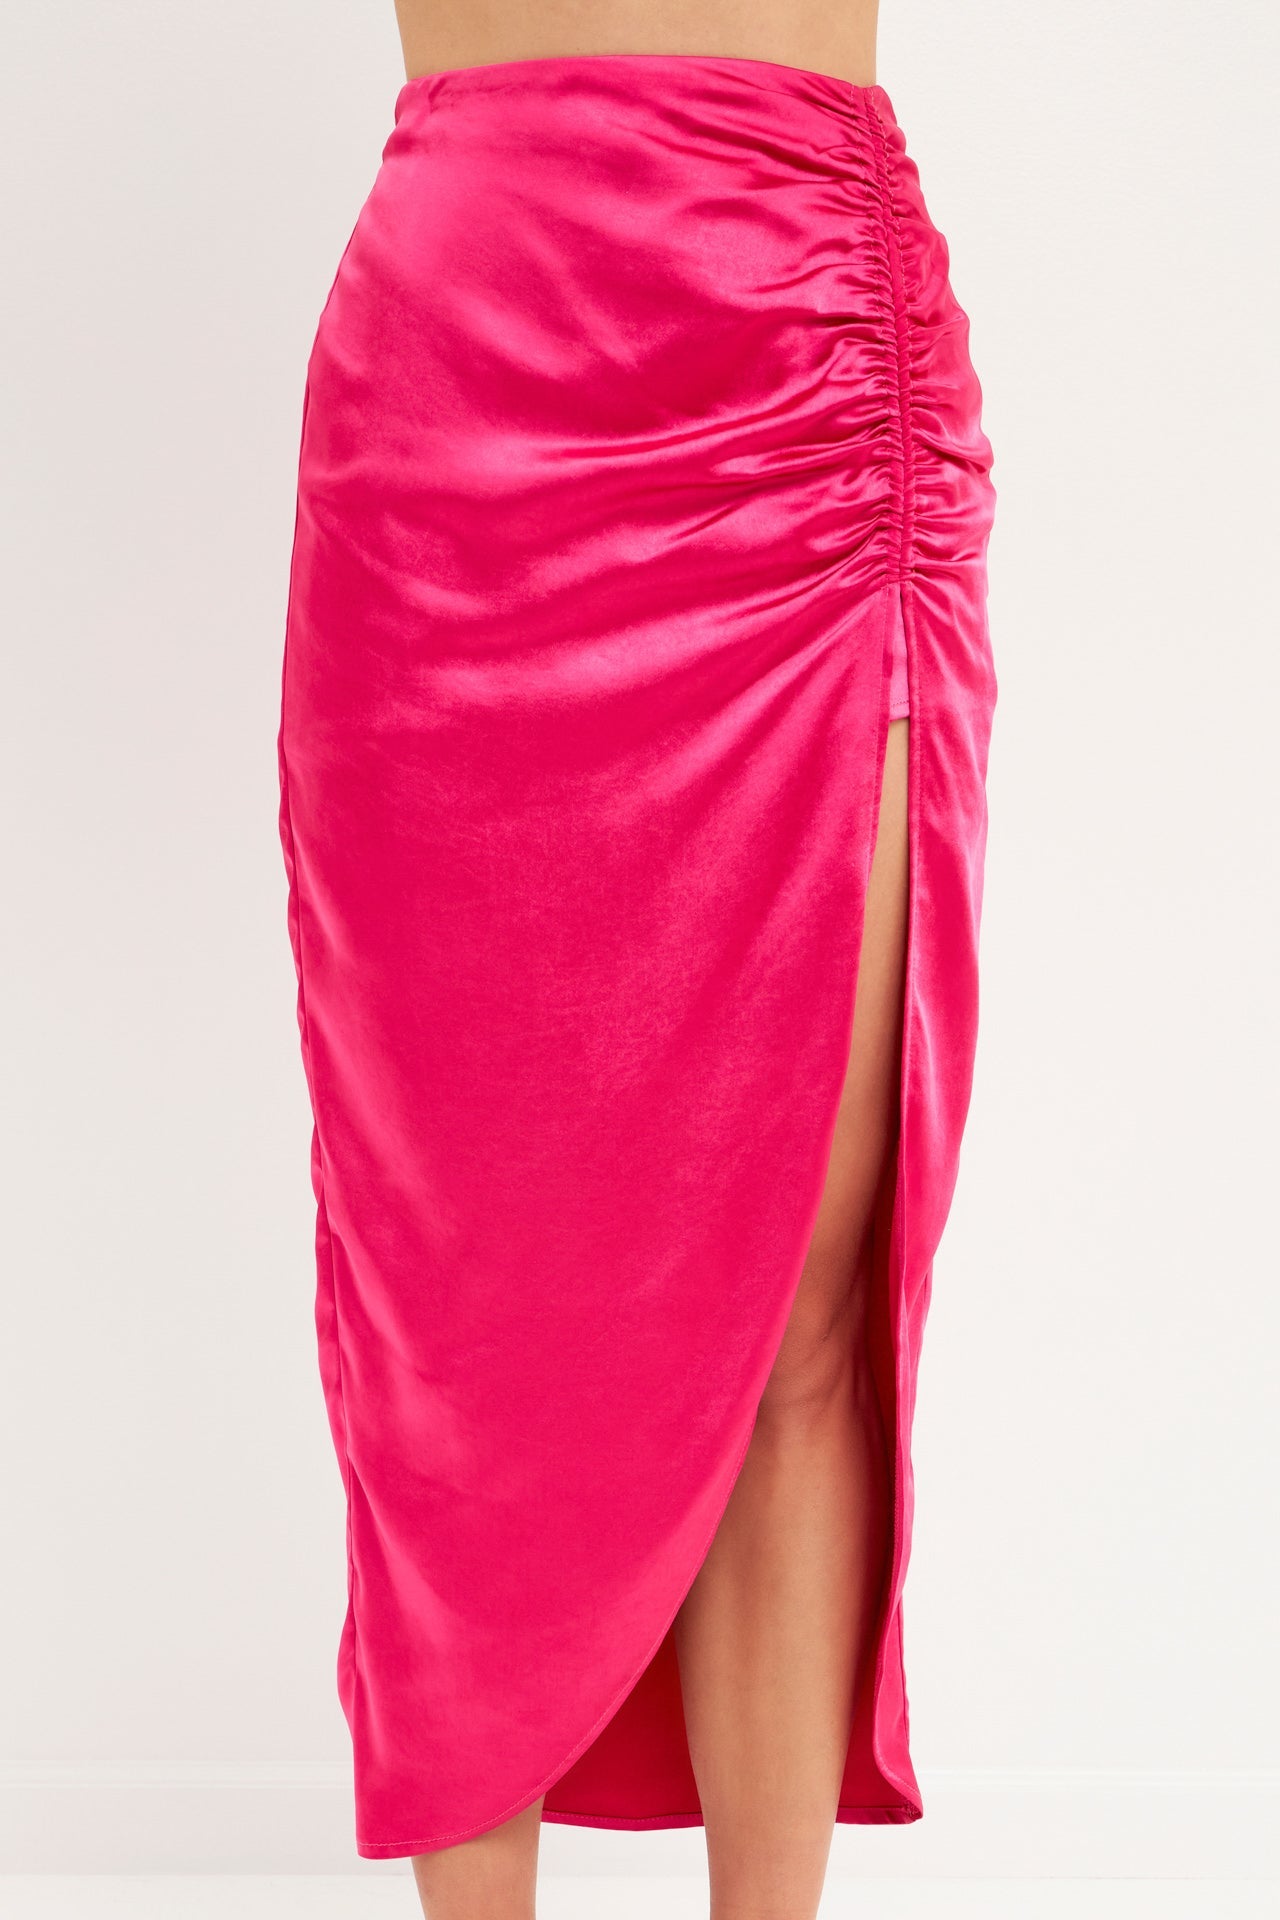 Endless Rose - Front Slit Midi Skirt - Skirts in Women's Clothing available at endlessrose.com